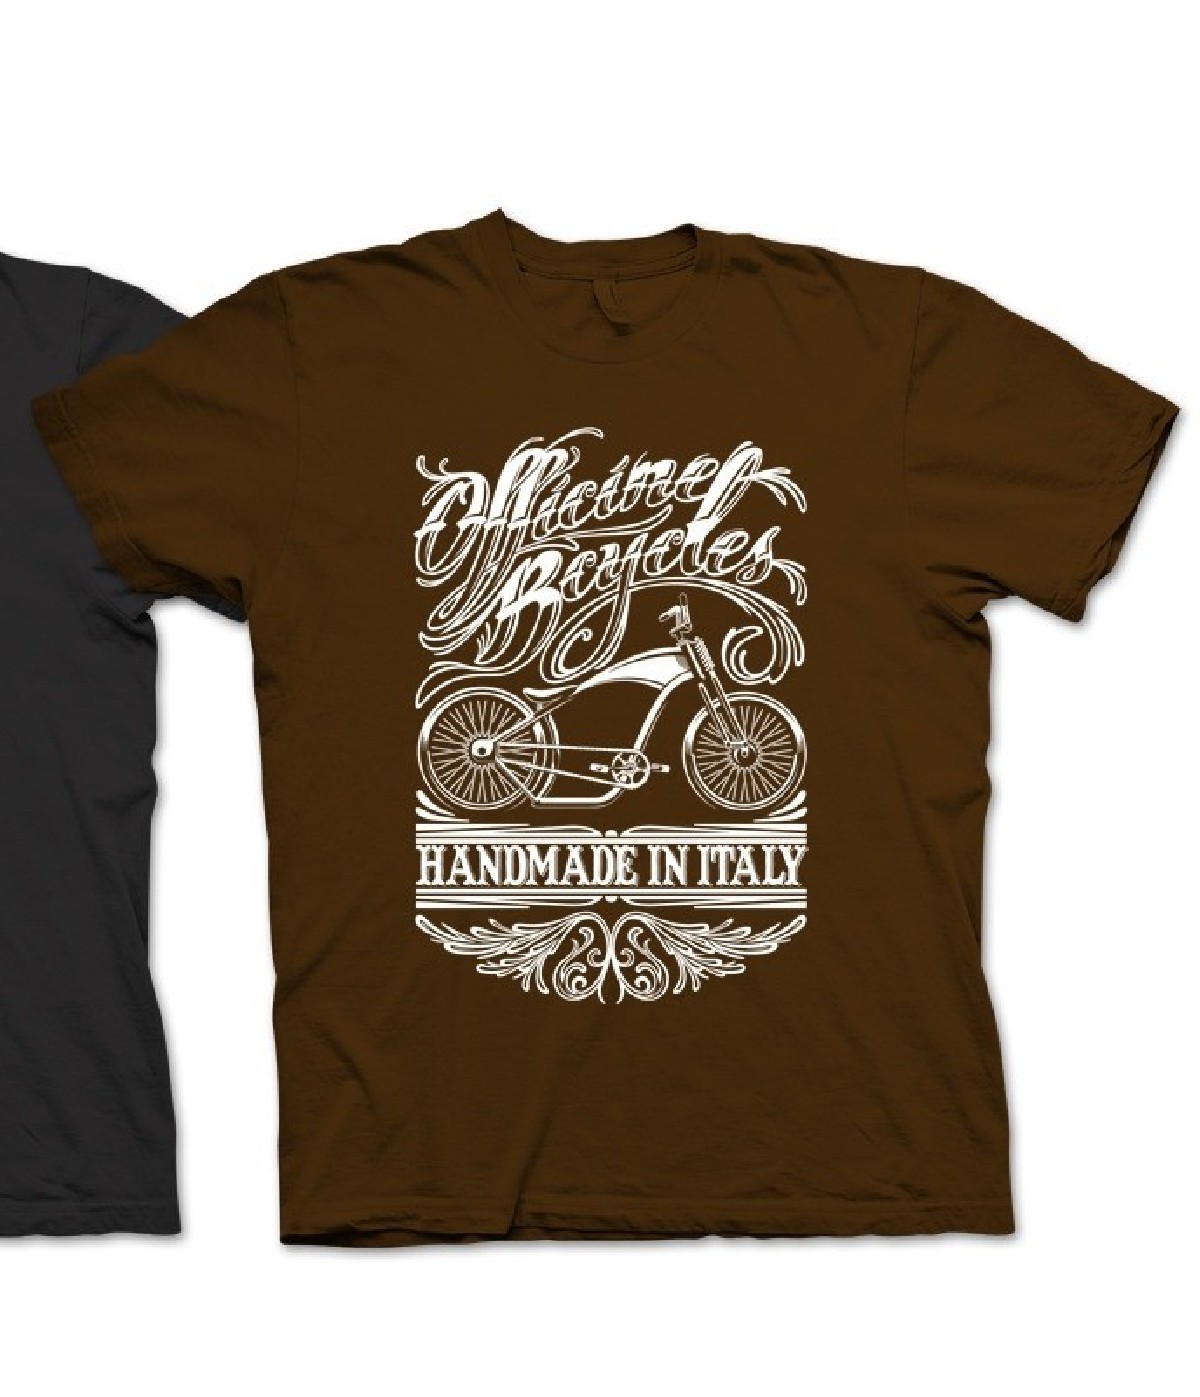 T-SHIRT Officine Bcycles Chopper Chocolate